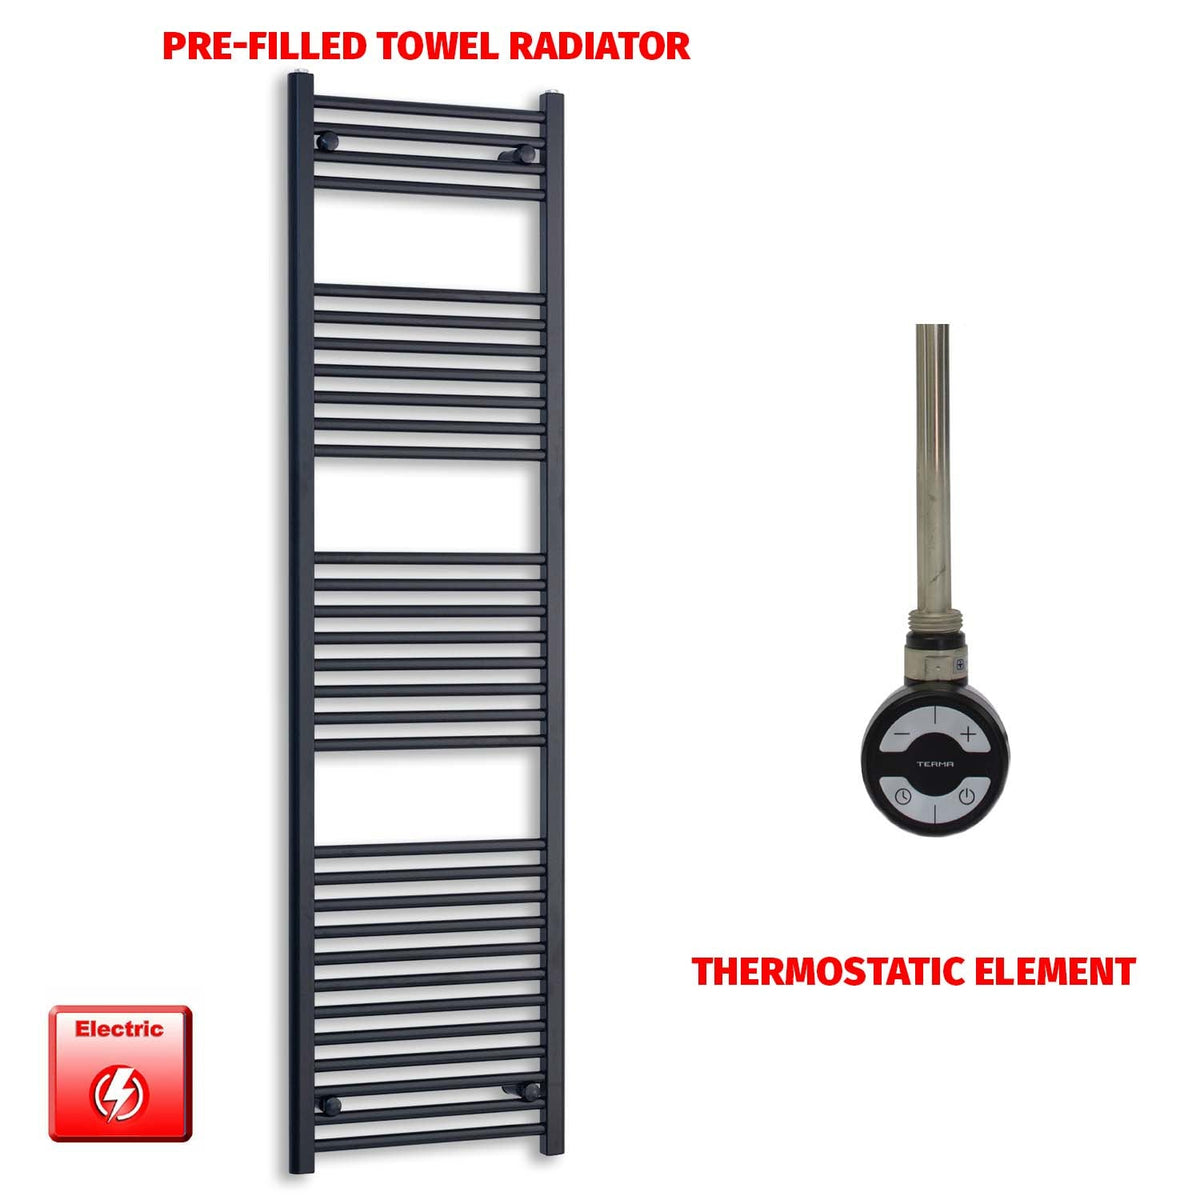 1800 x 600 Flat Black Pre-Filled Electric Heated Towel Radiator HTR MOA Thermostatic No Timer